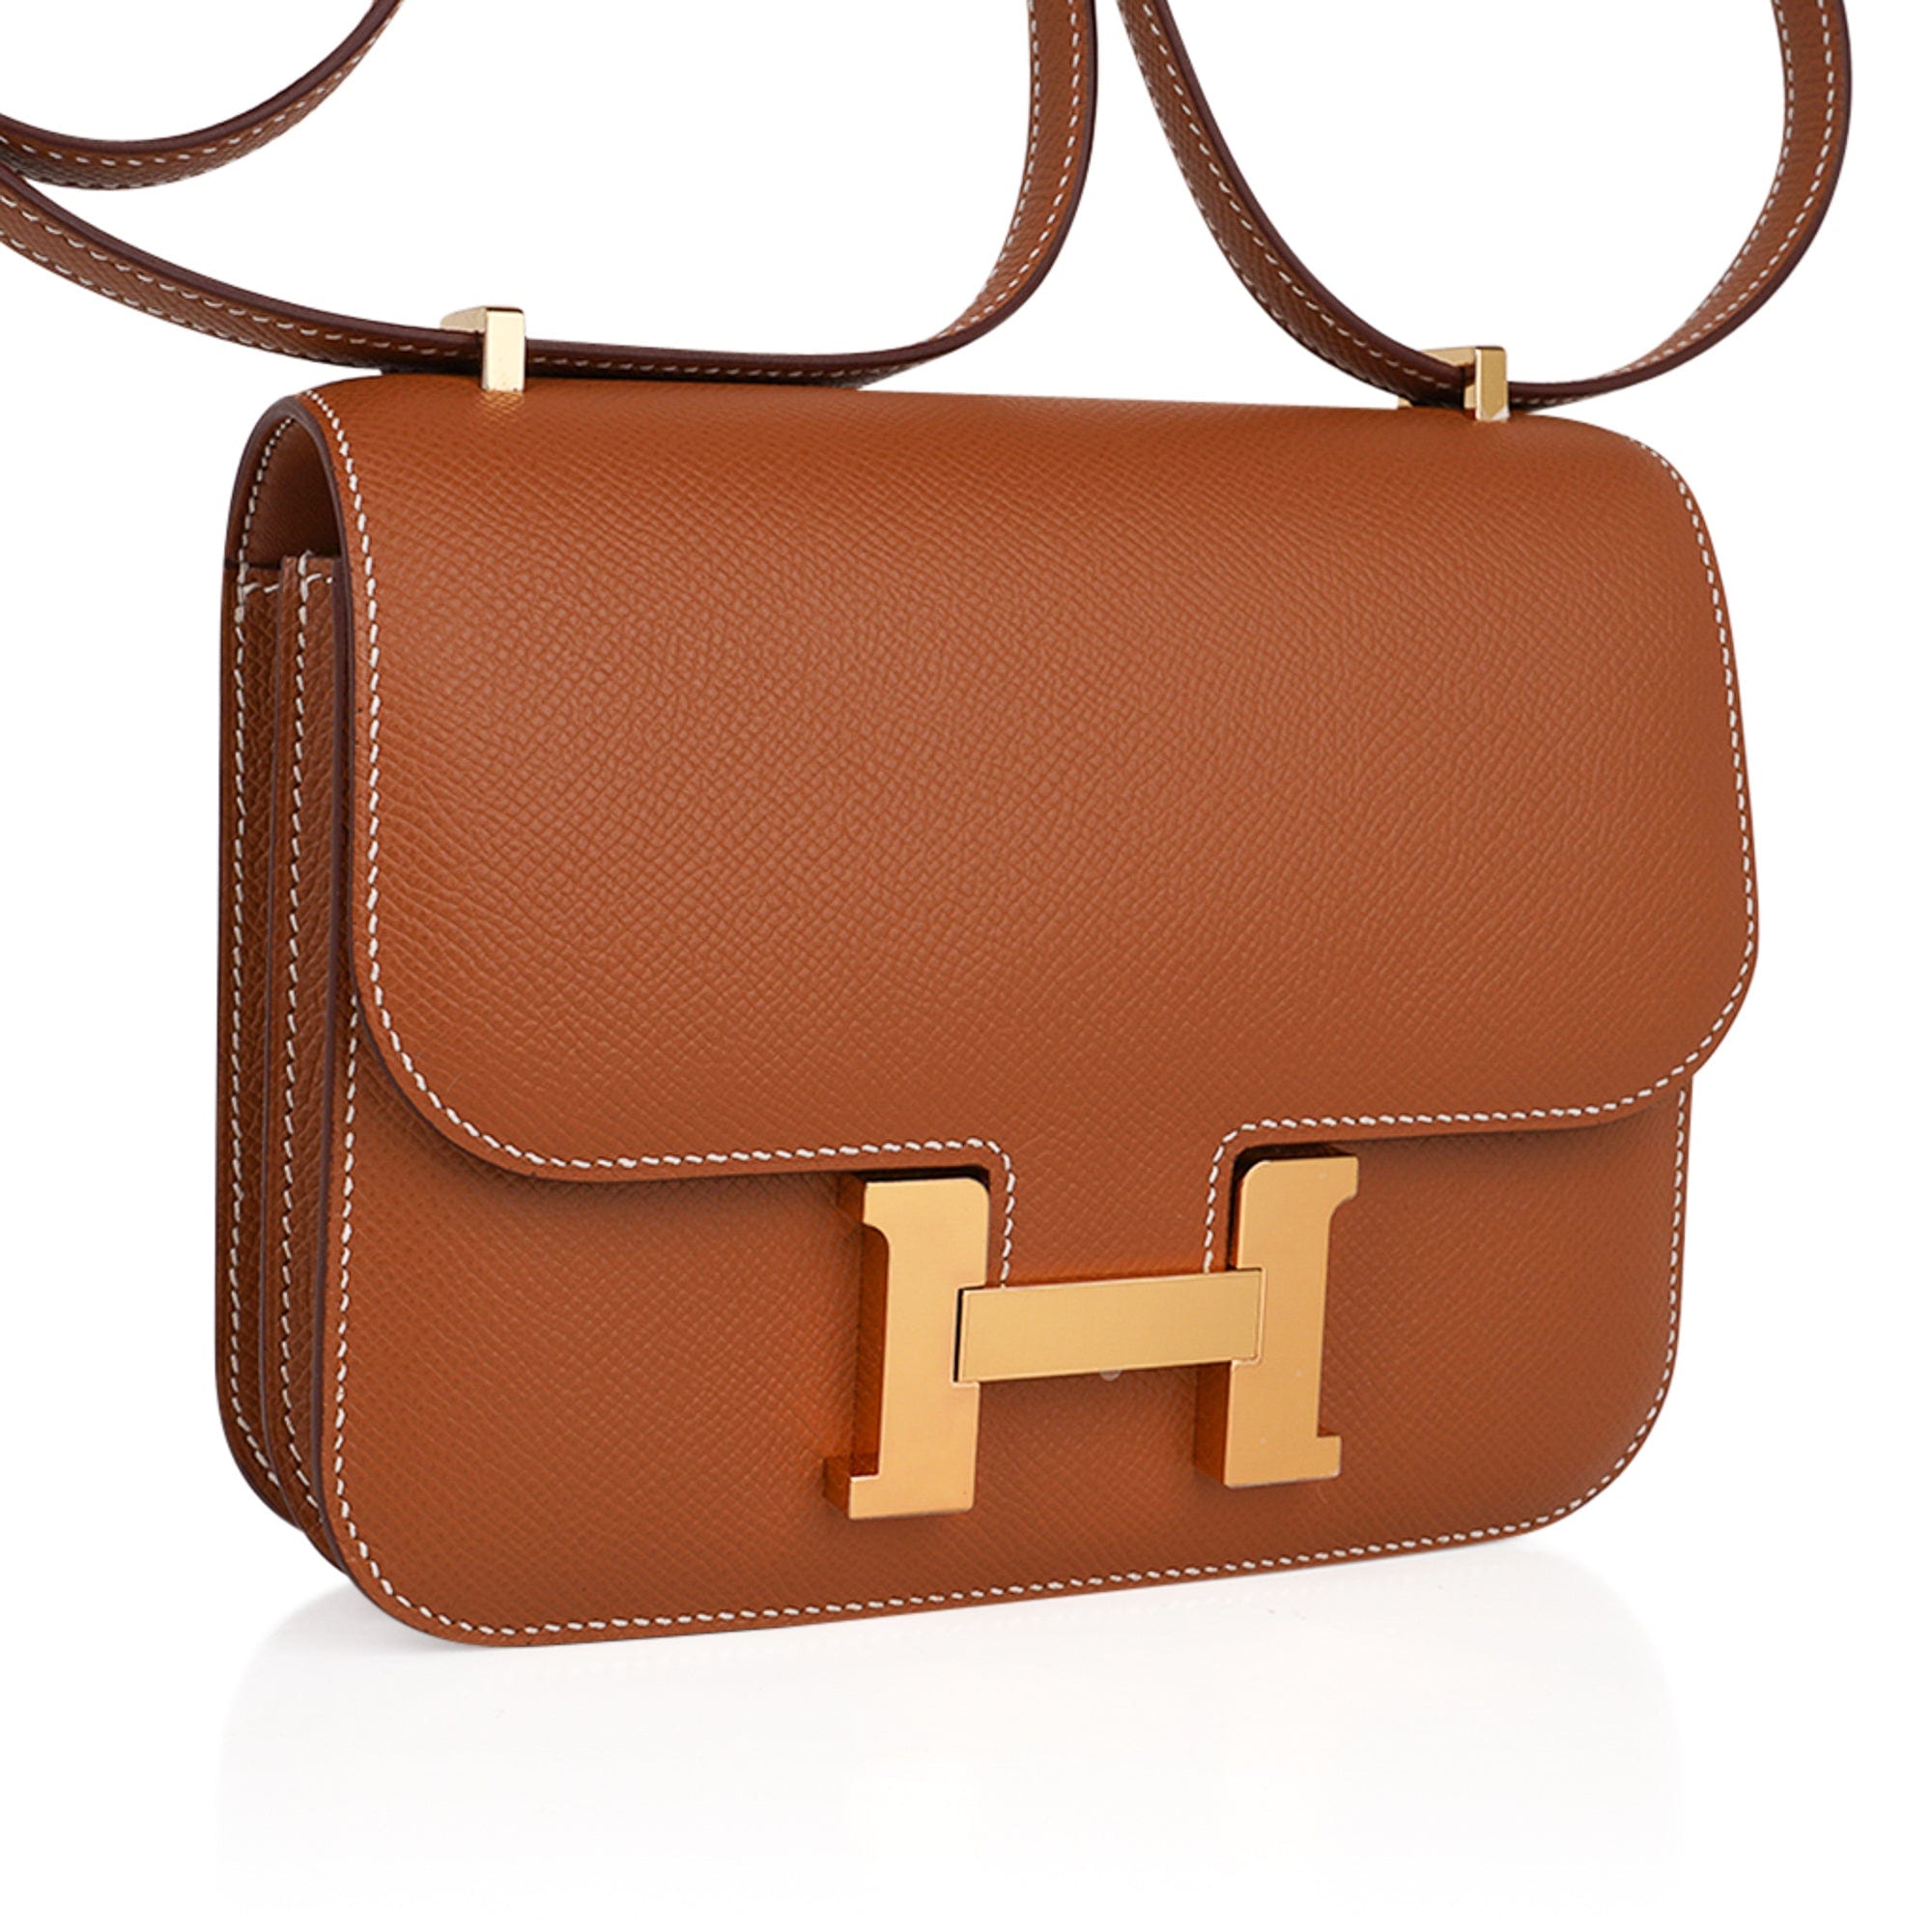 Hermes Constance Cartable Bag Limited Edition Rouge H Sombrero